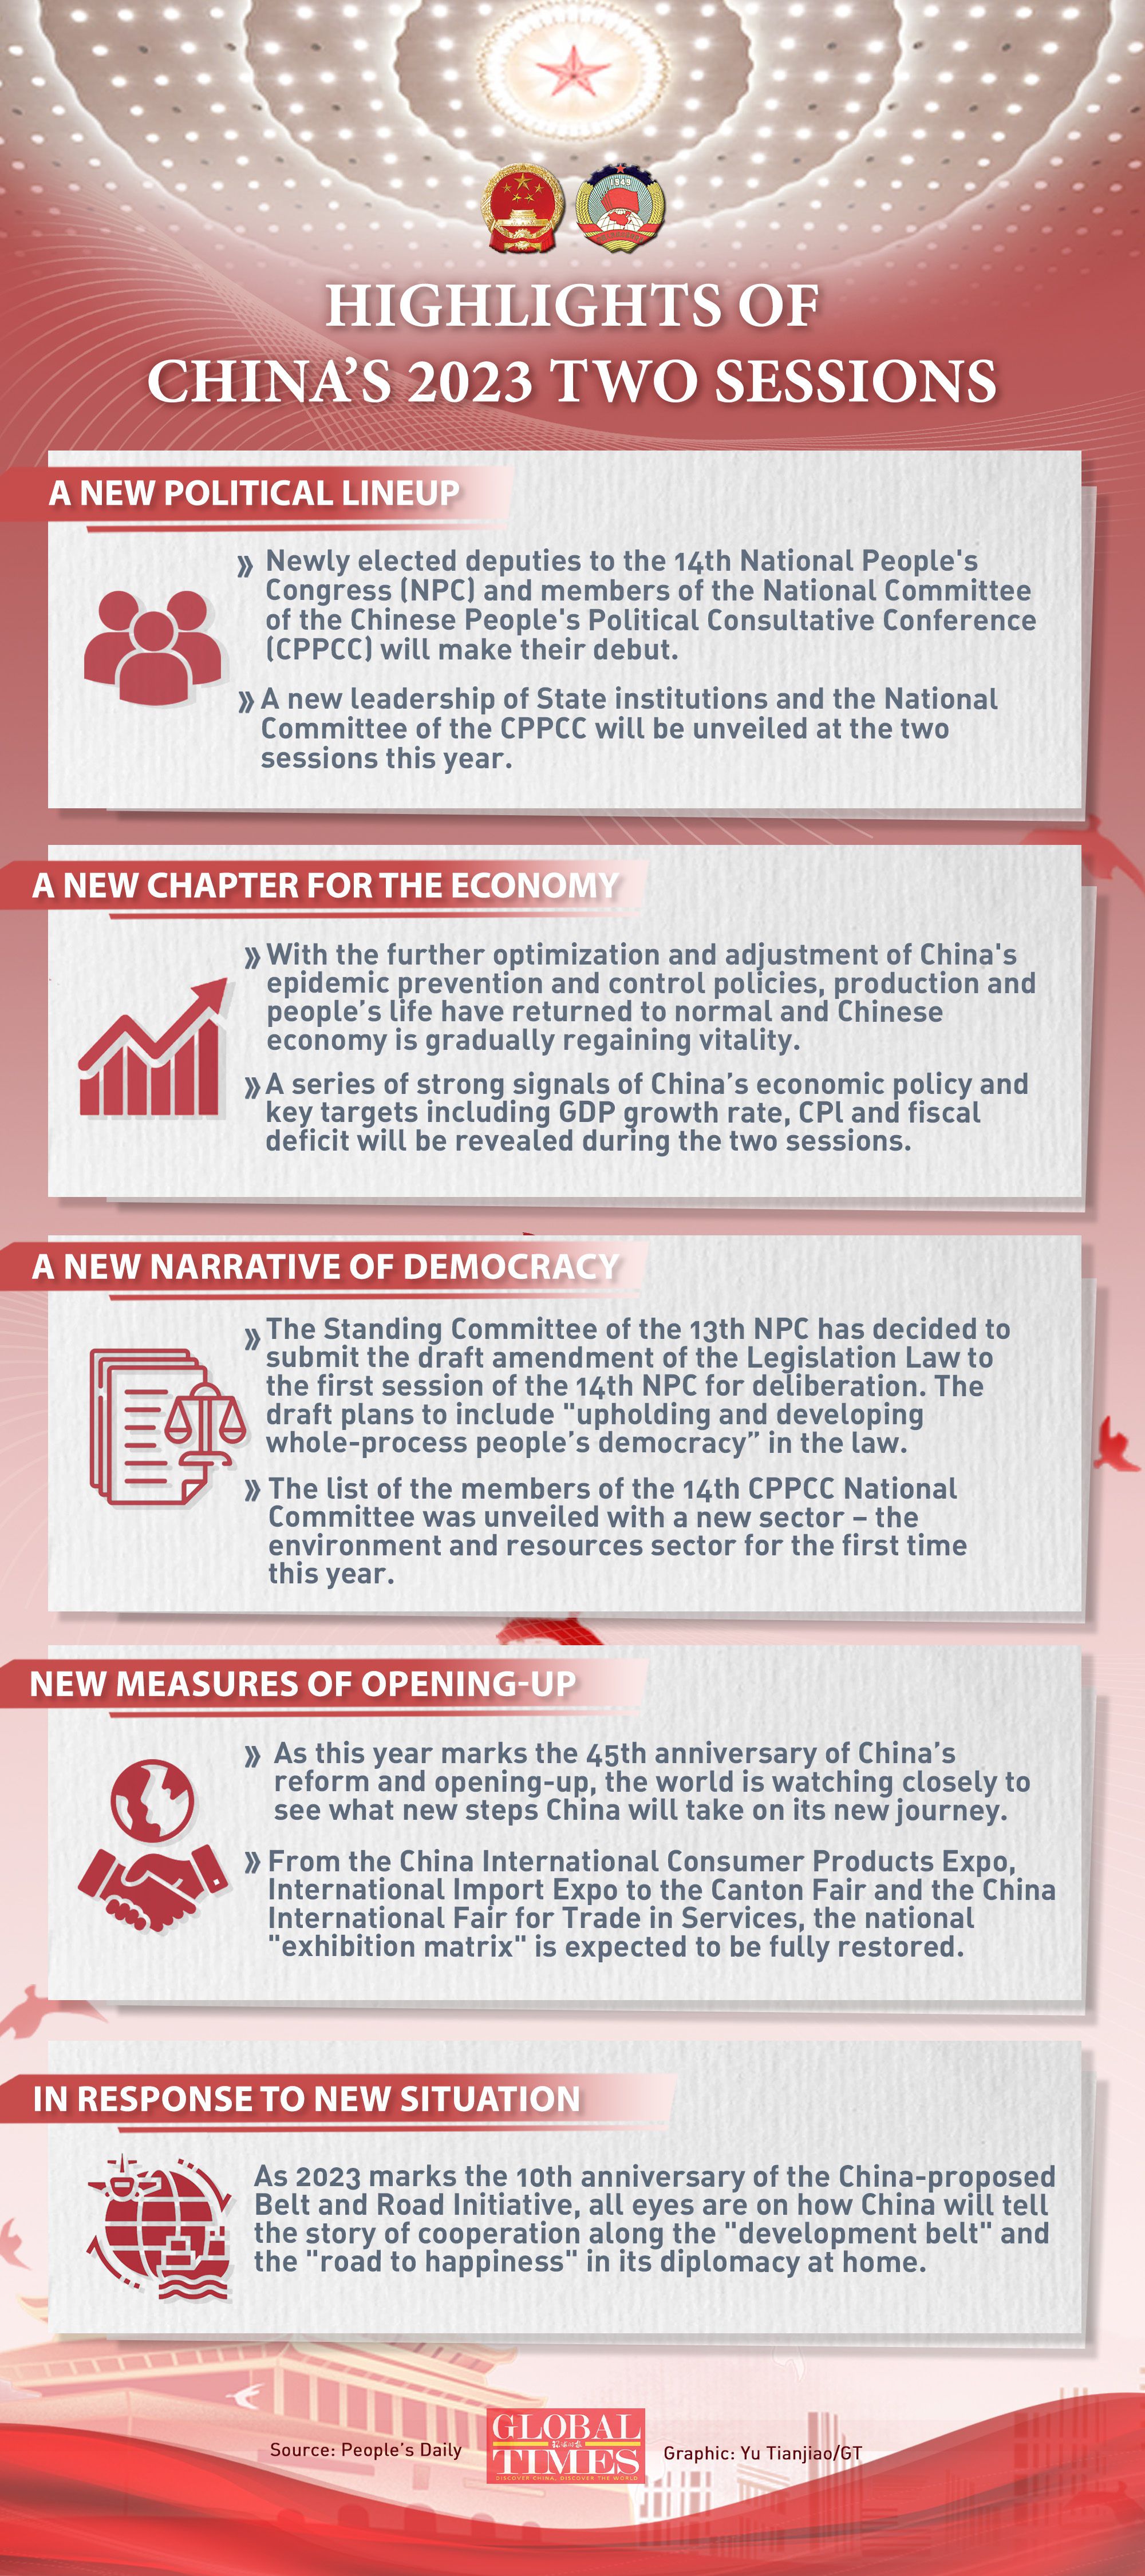 Highlights of China’s 2023 two sessions